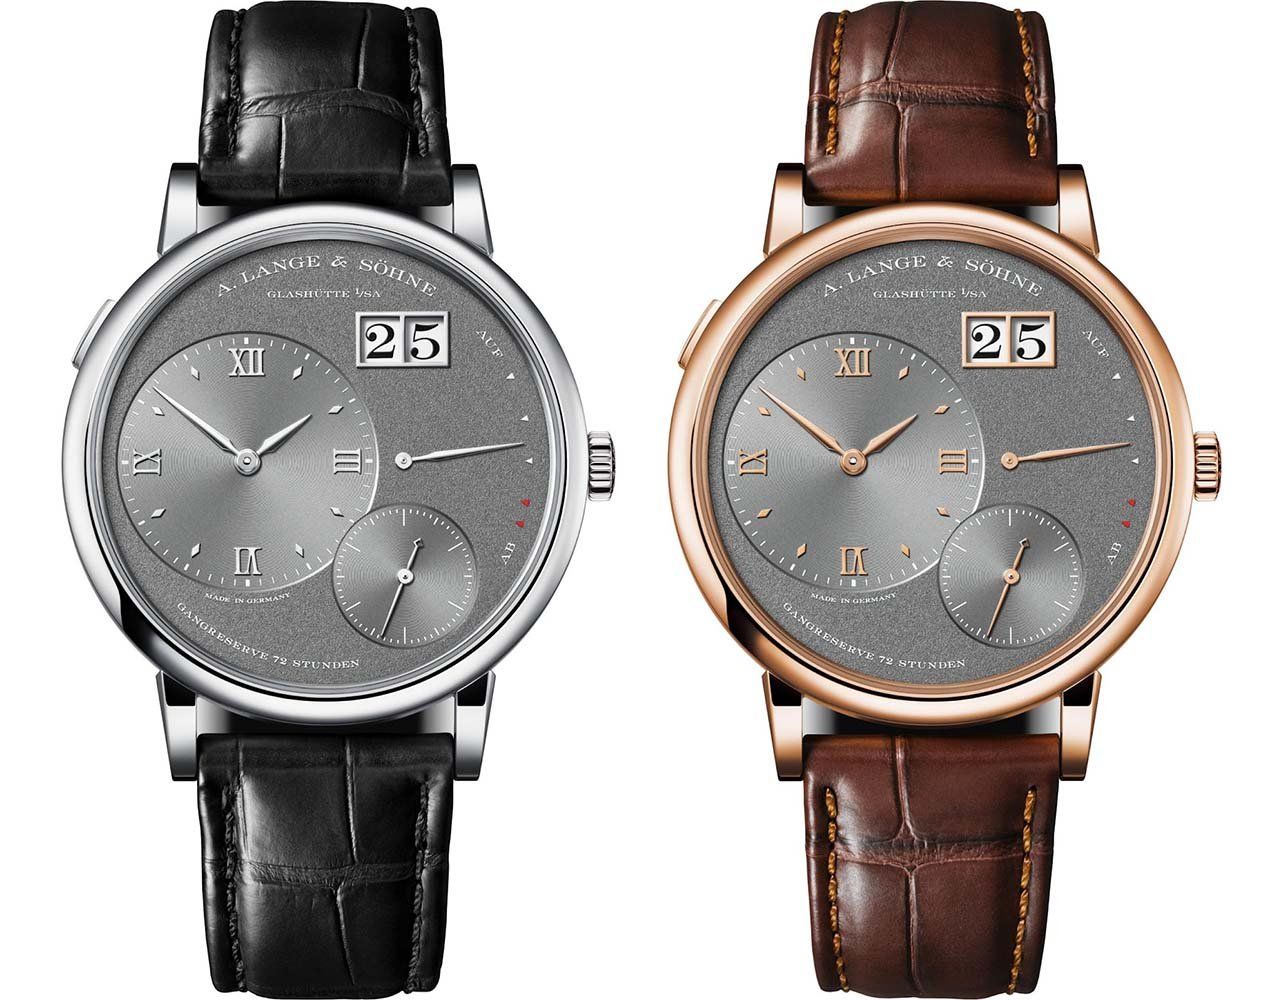 Grand Lange 1 in white gold (left) and pink gold (right)